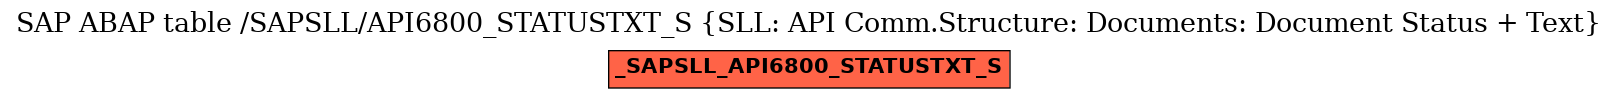 E-R Diagram for table /SAPSLL/API6800_STATUSTXT_S (SLL: API Comm.Structure: Documents: Document Status + Text)